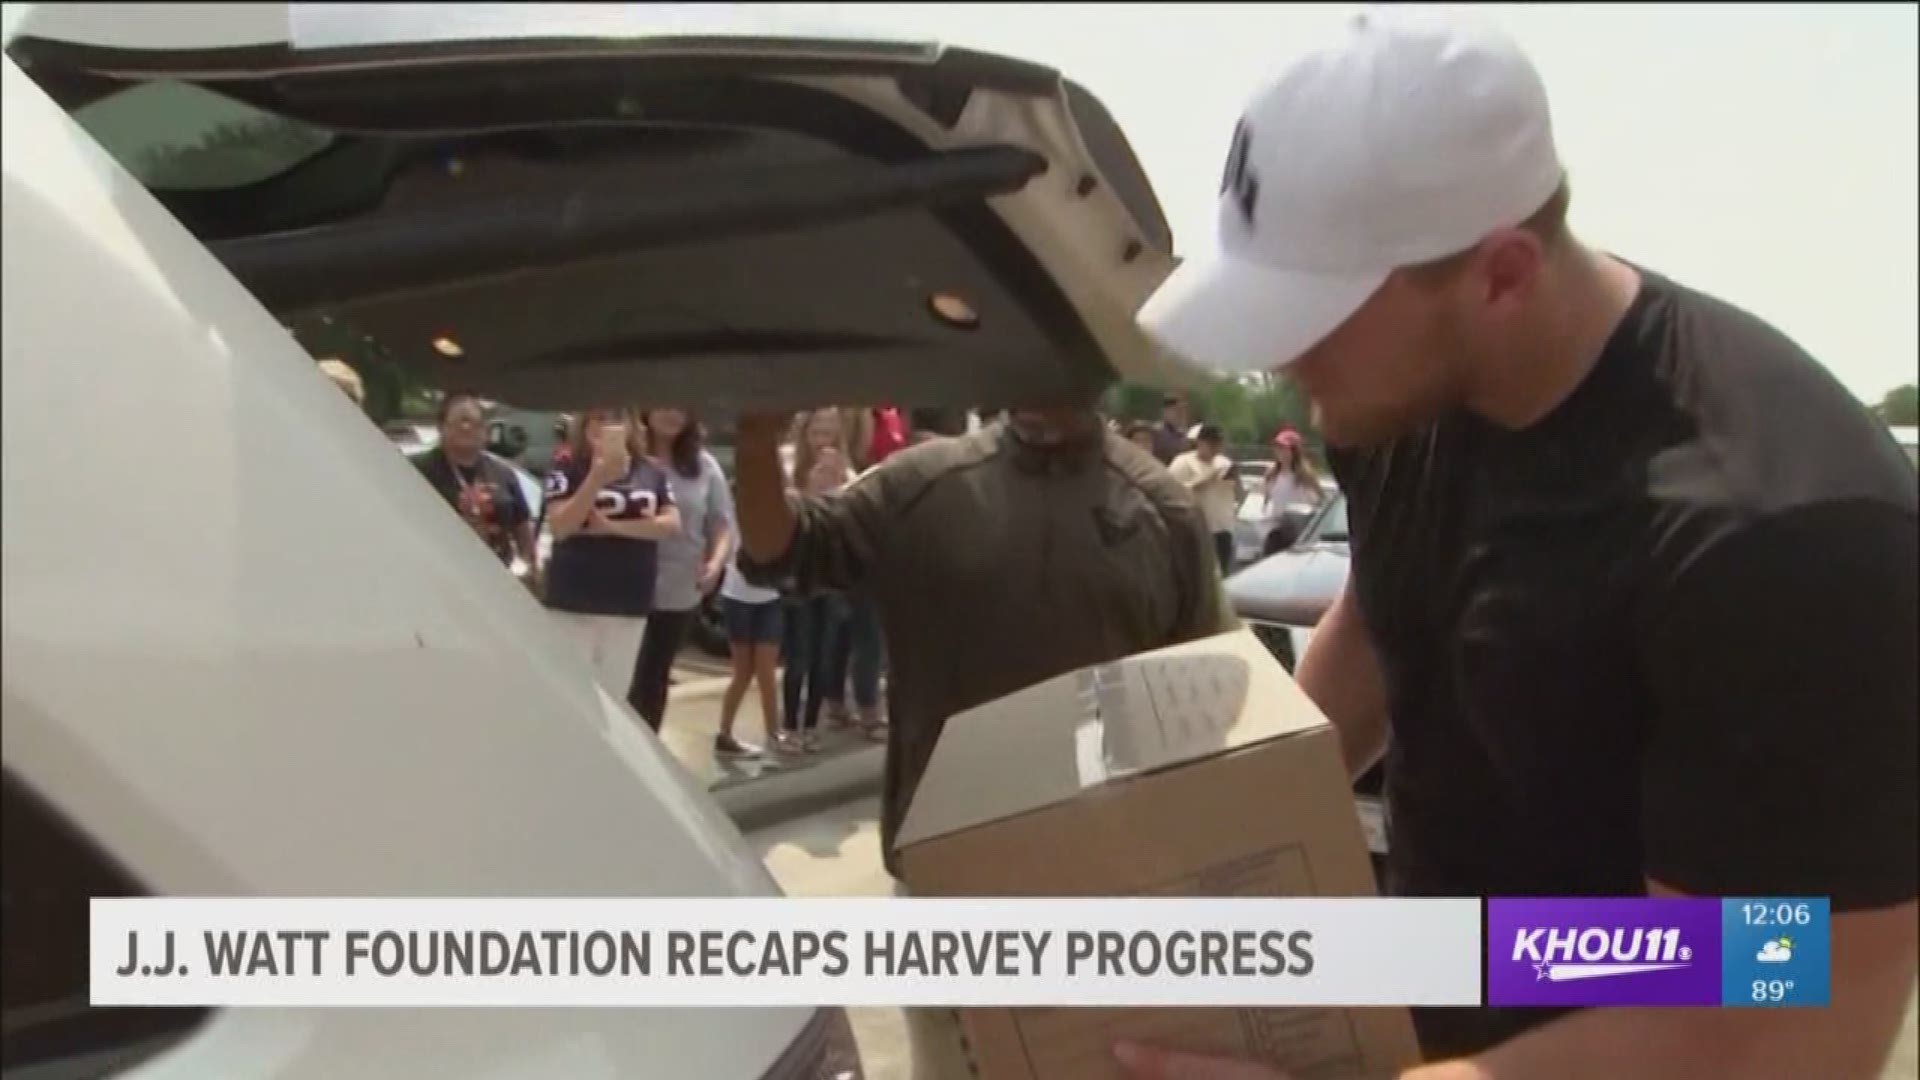 On the anniversary of Hurricane Harvey, Houston Texans star J.J. Watt provided a recap and future plans for relief funds raised following the storm.